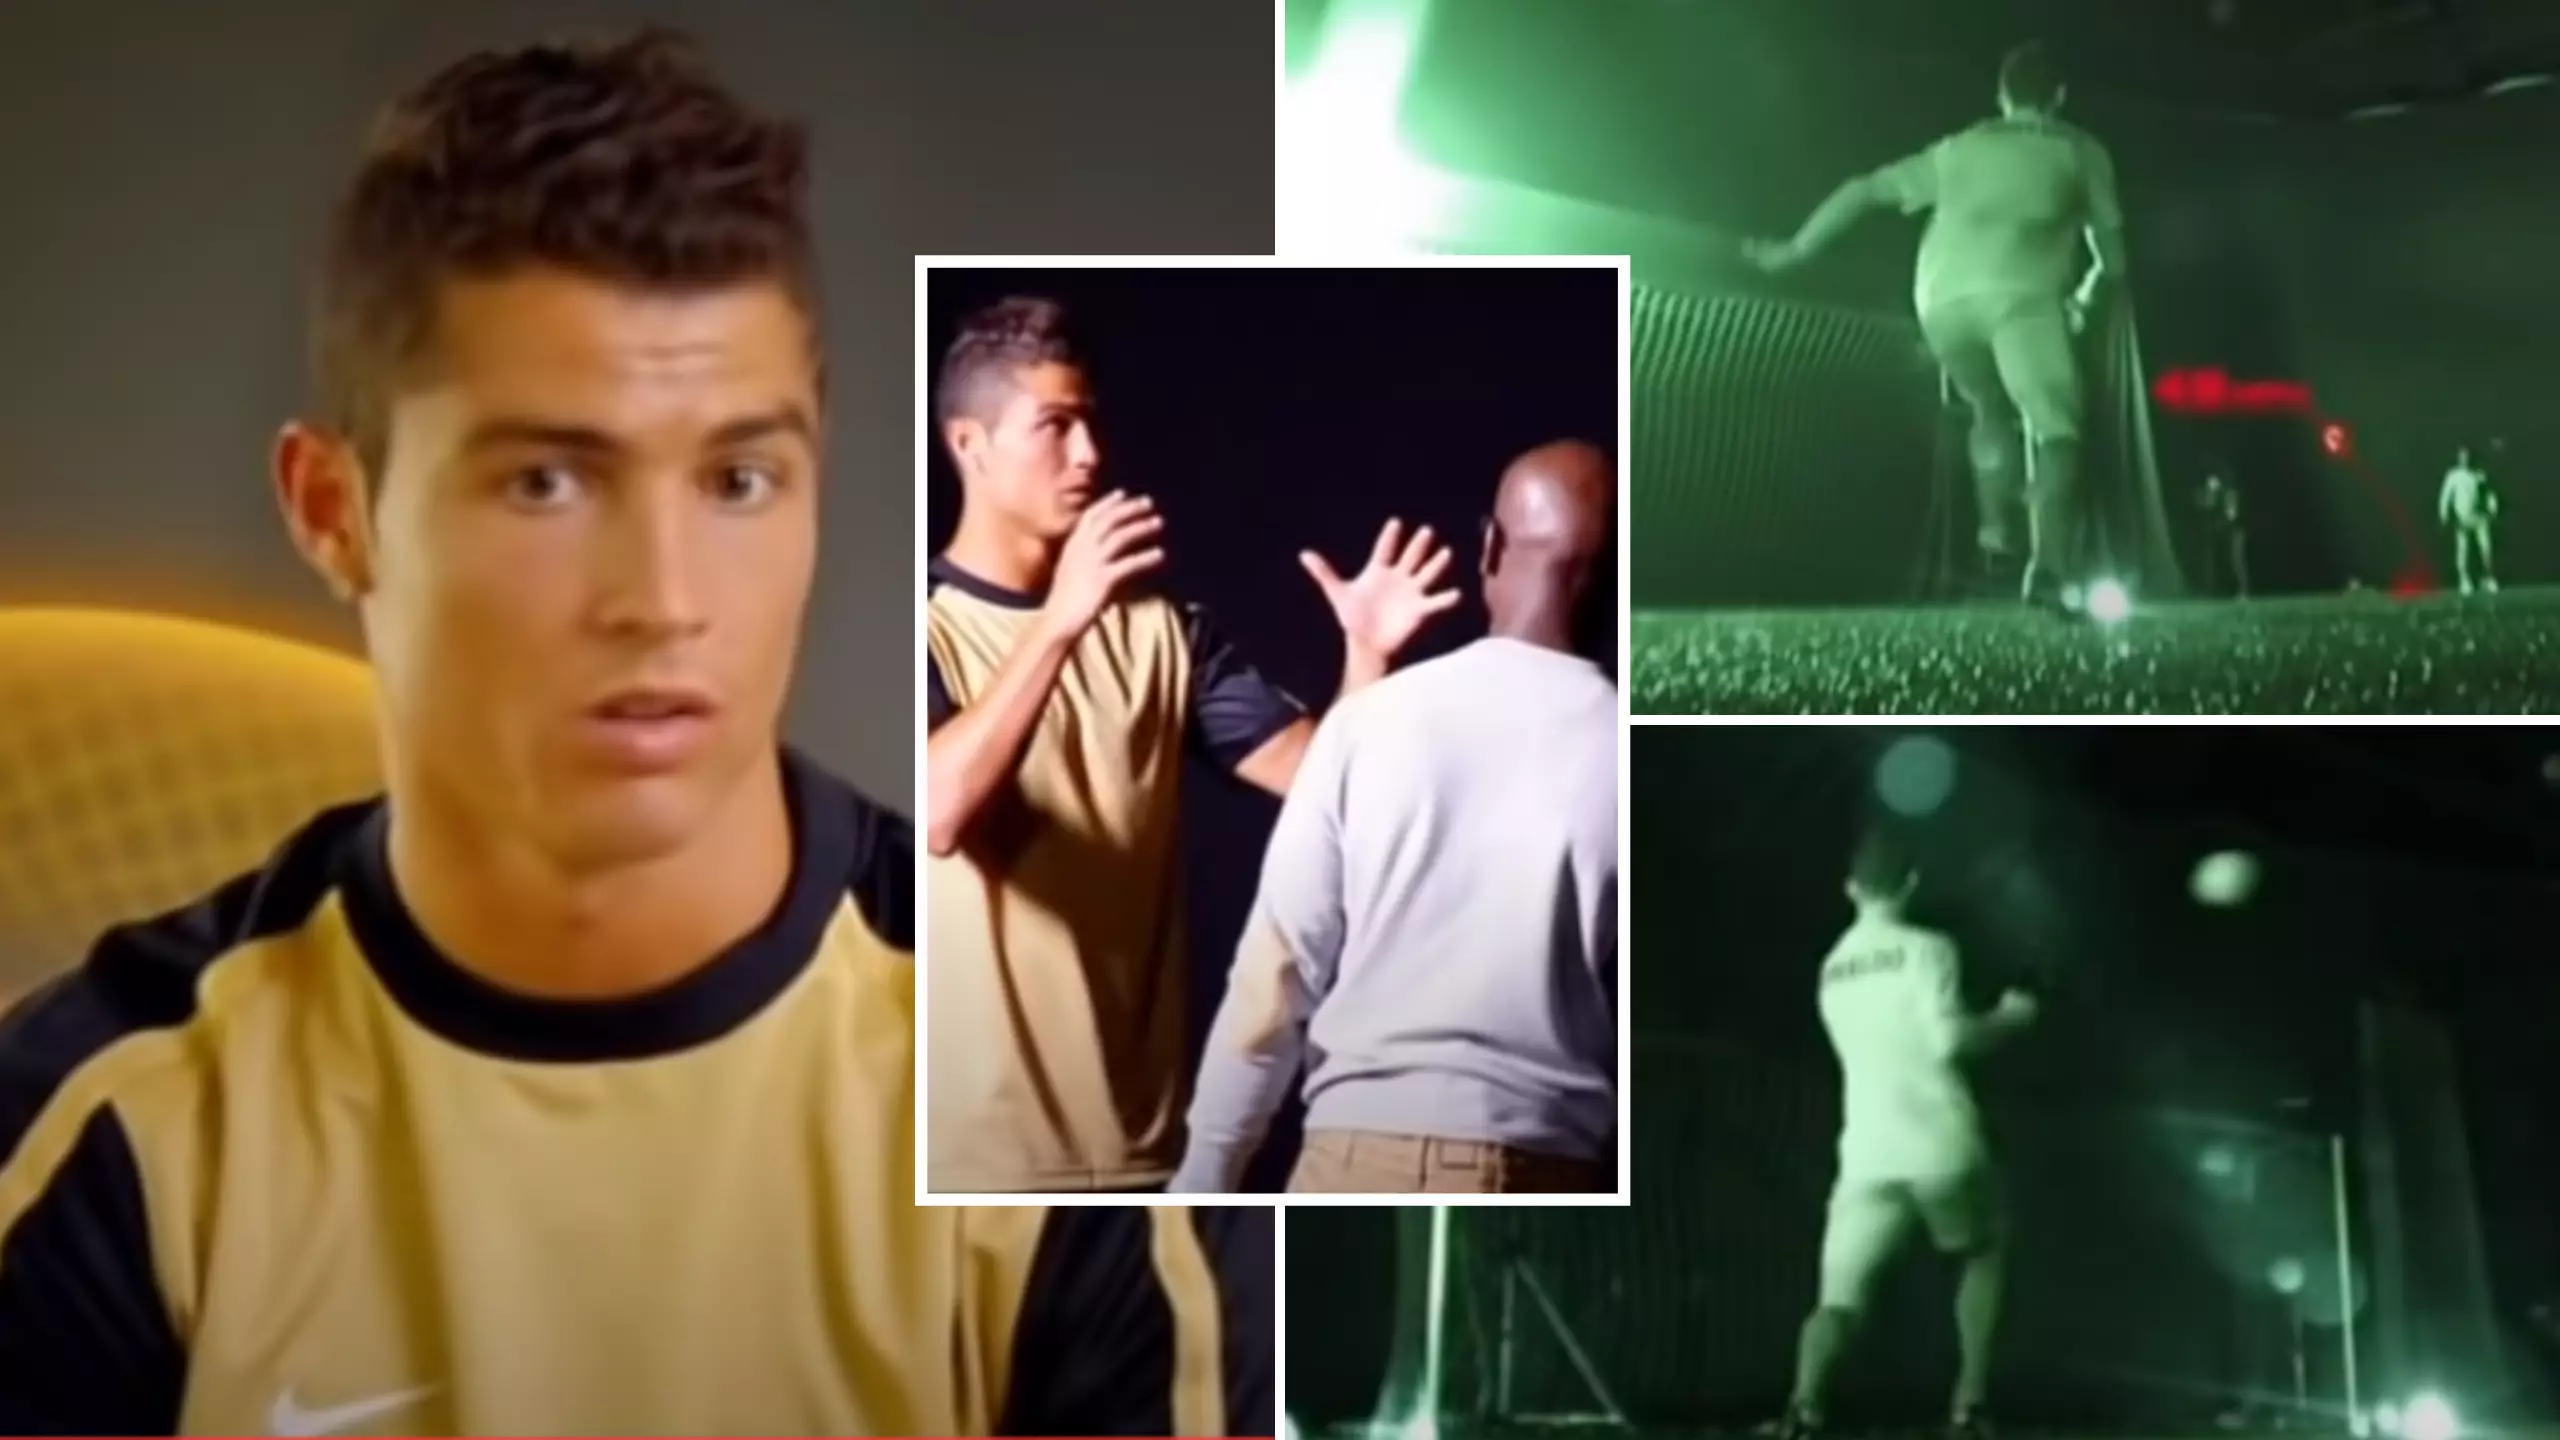 Rare Footage Sees Cristiano Ronaldo Achieve The Ultimate 'No-Look Finish' In Complete Darkness